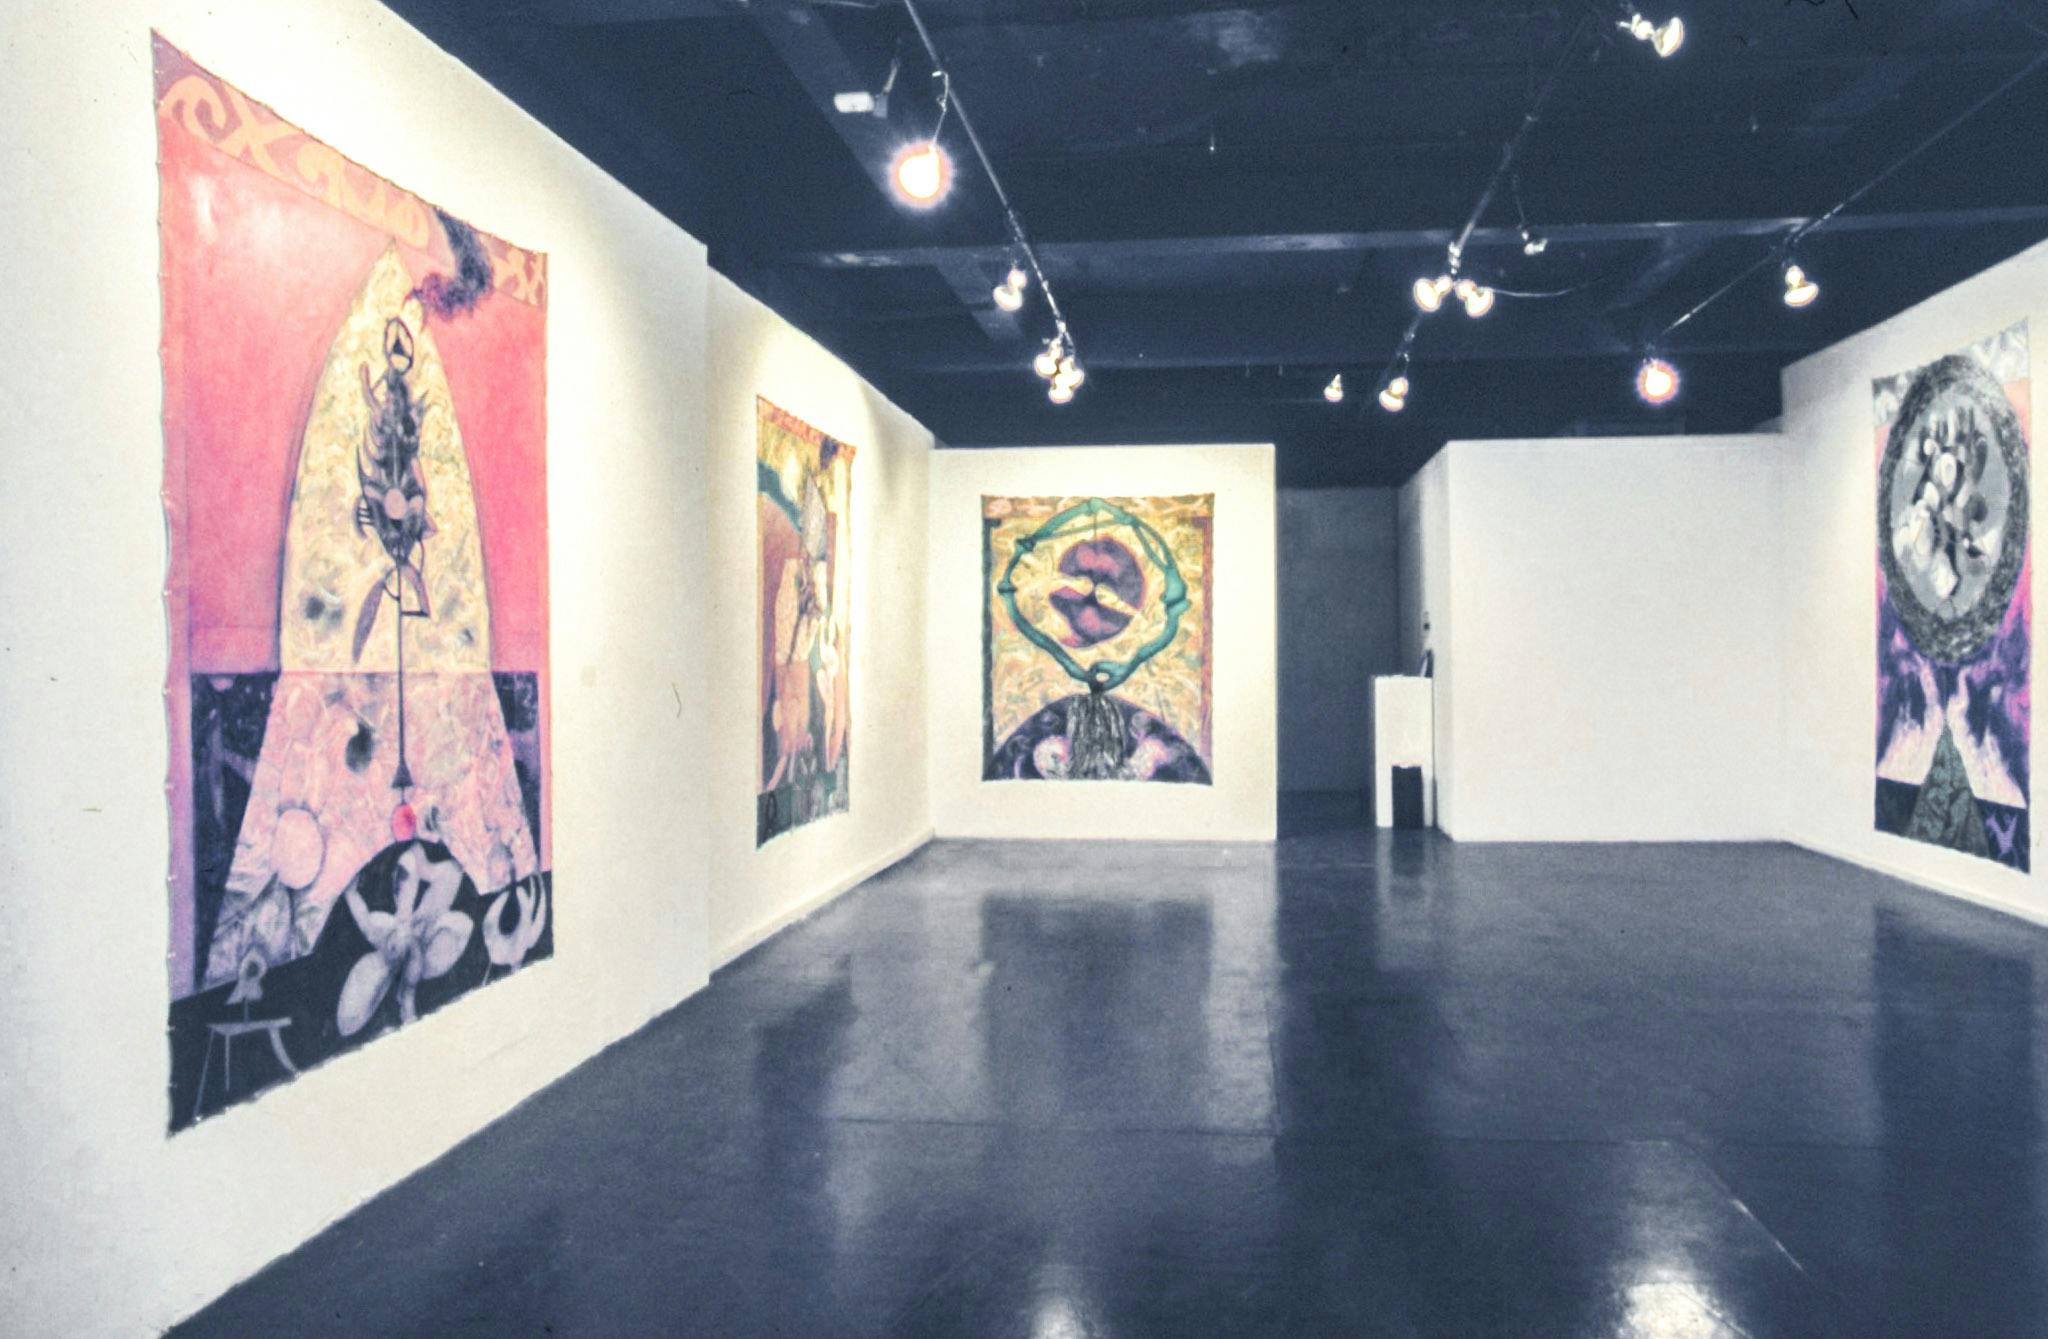 Several large, colourful paintings are pinned onto the walls of a gallery. The paintings show complex patterns and abstracted images, some resembling hands, flowers, and insects. 